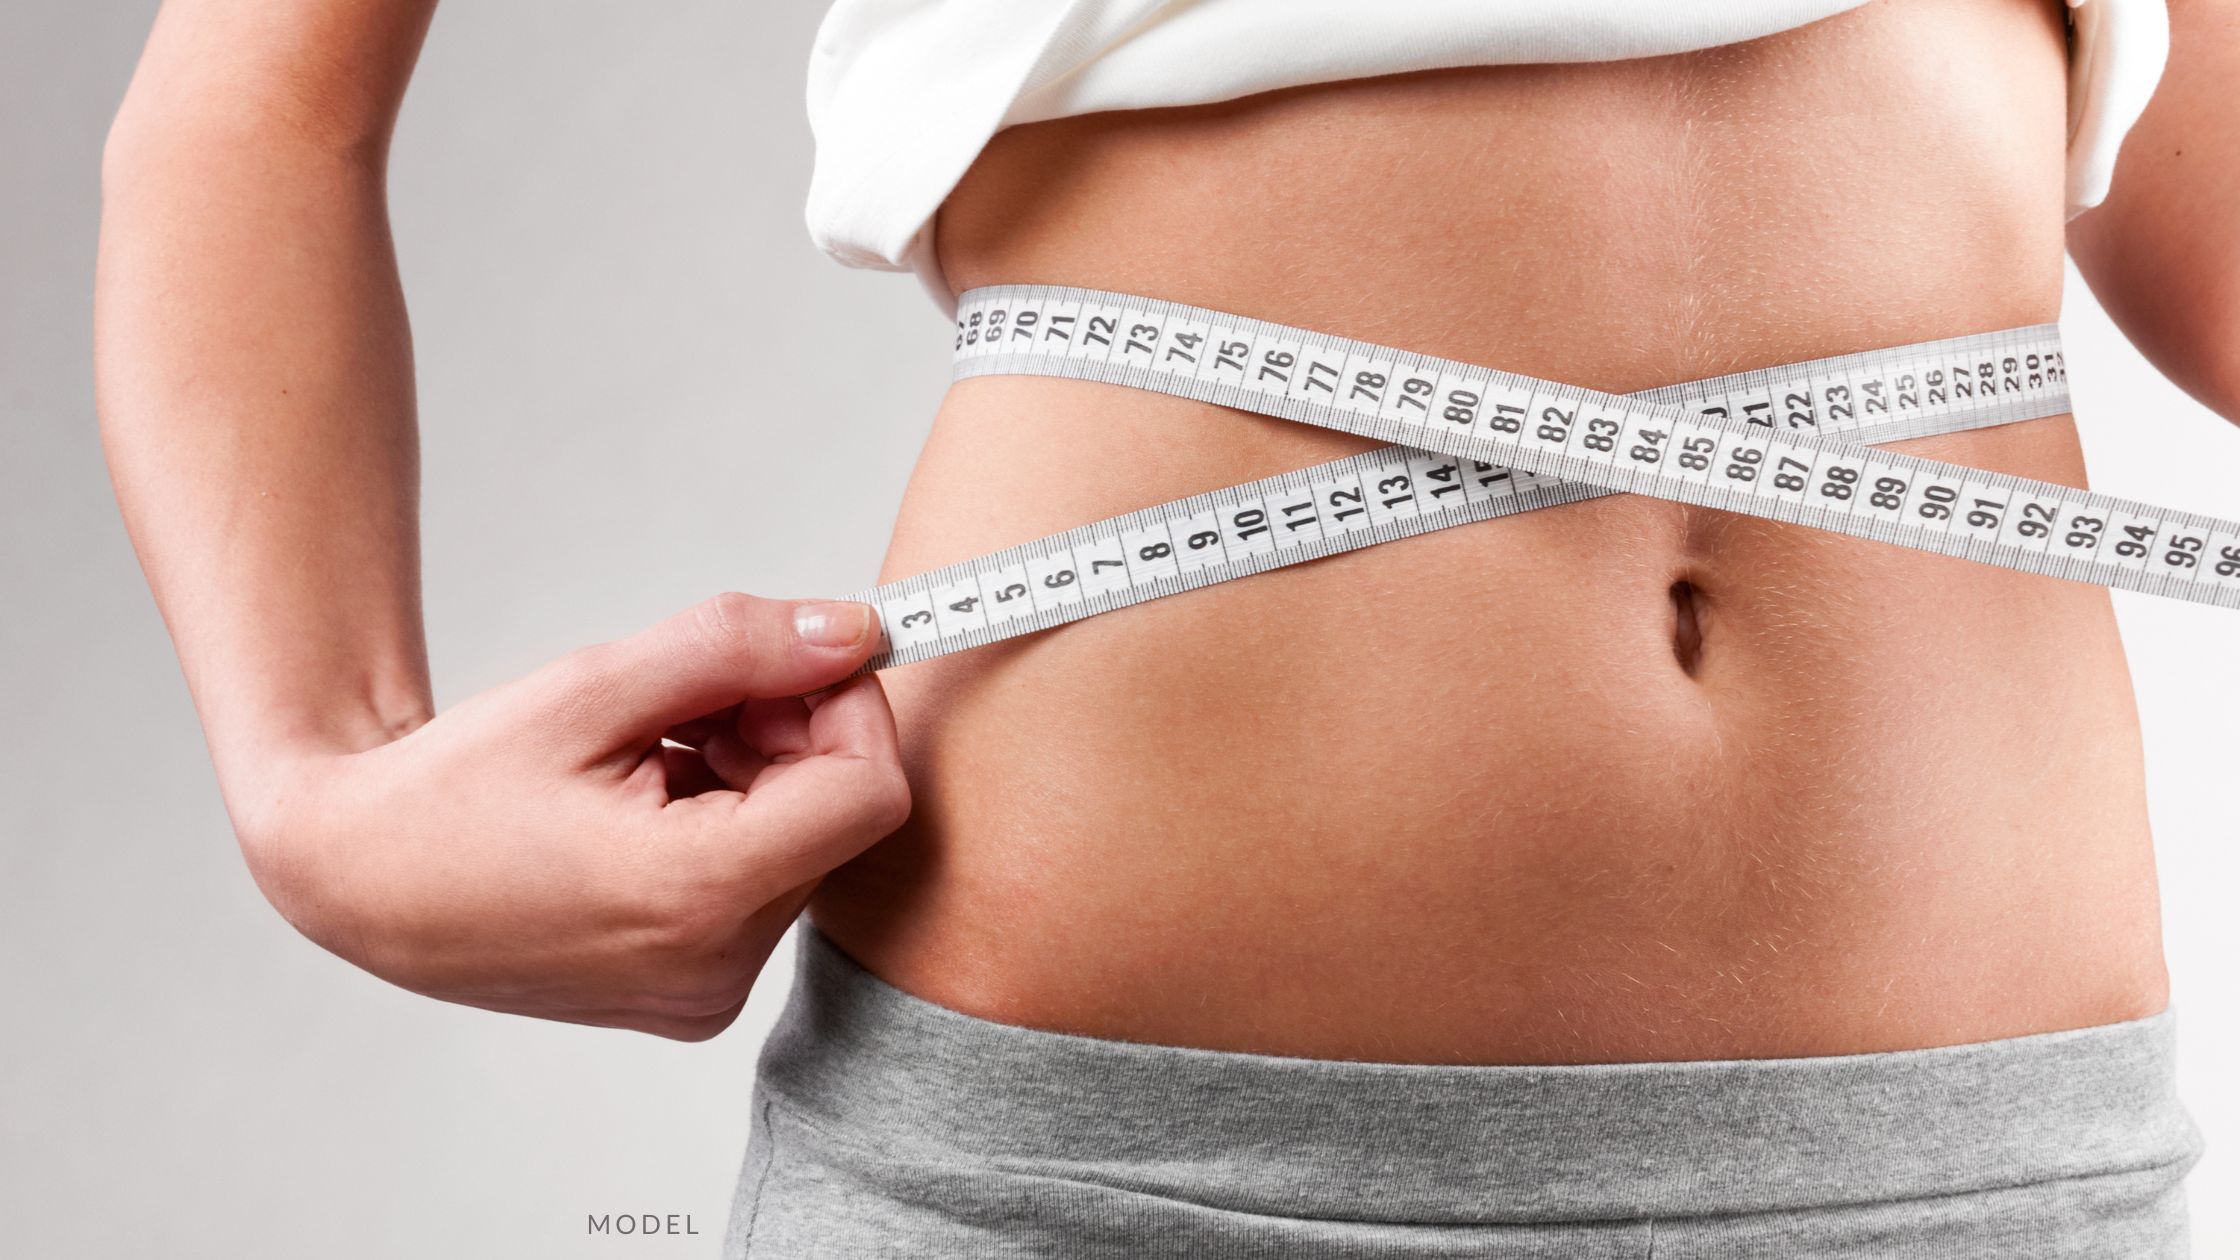 Why BodyTite With Tickle Lipo Are Your Best Body Contouring